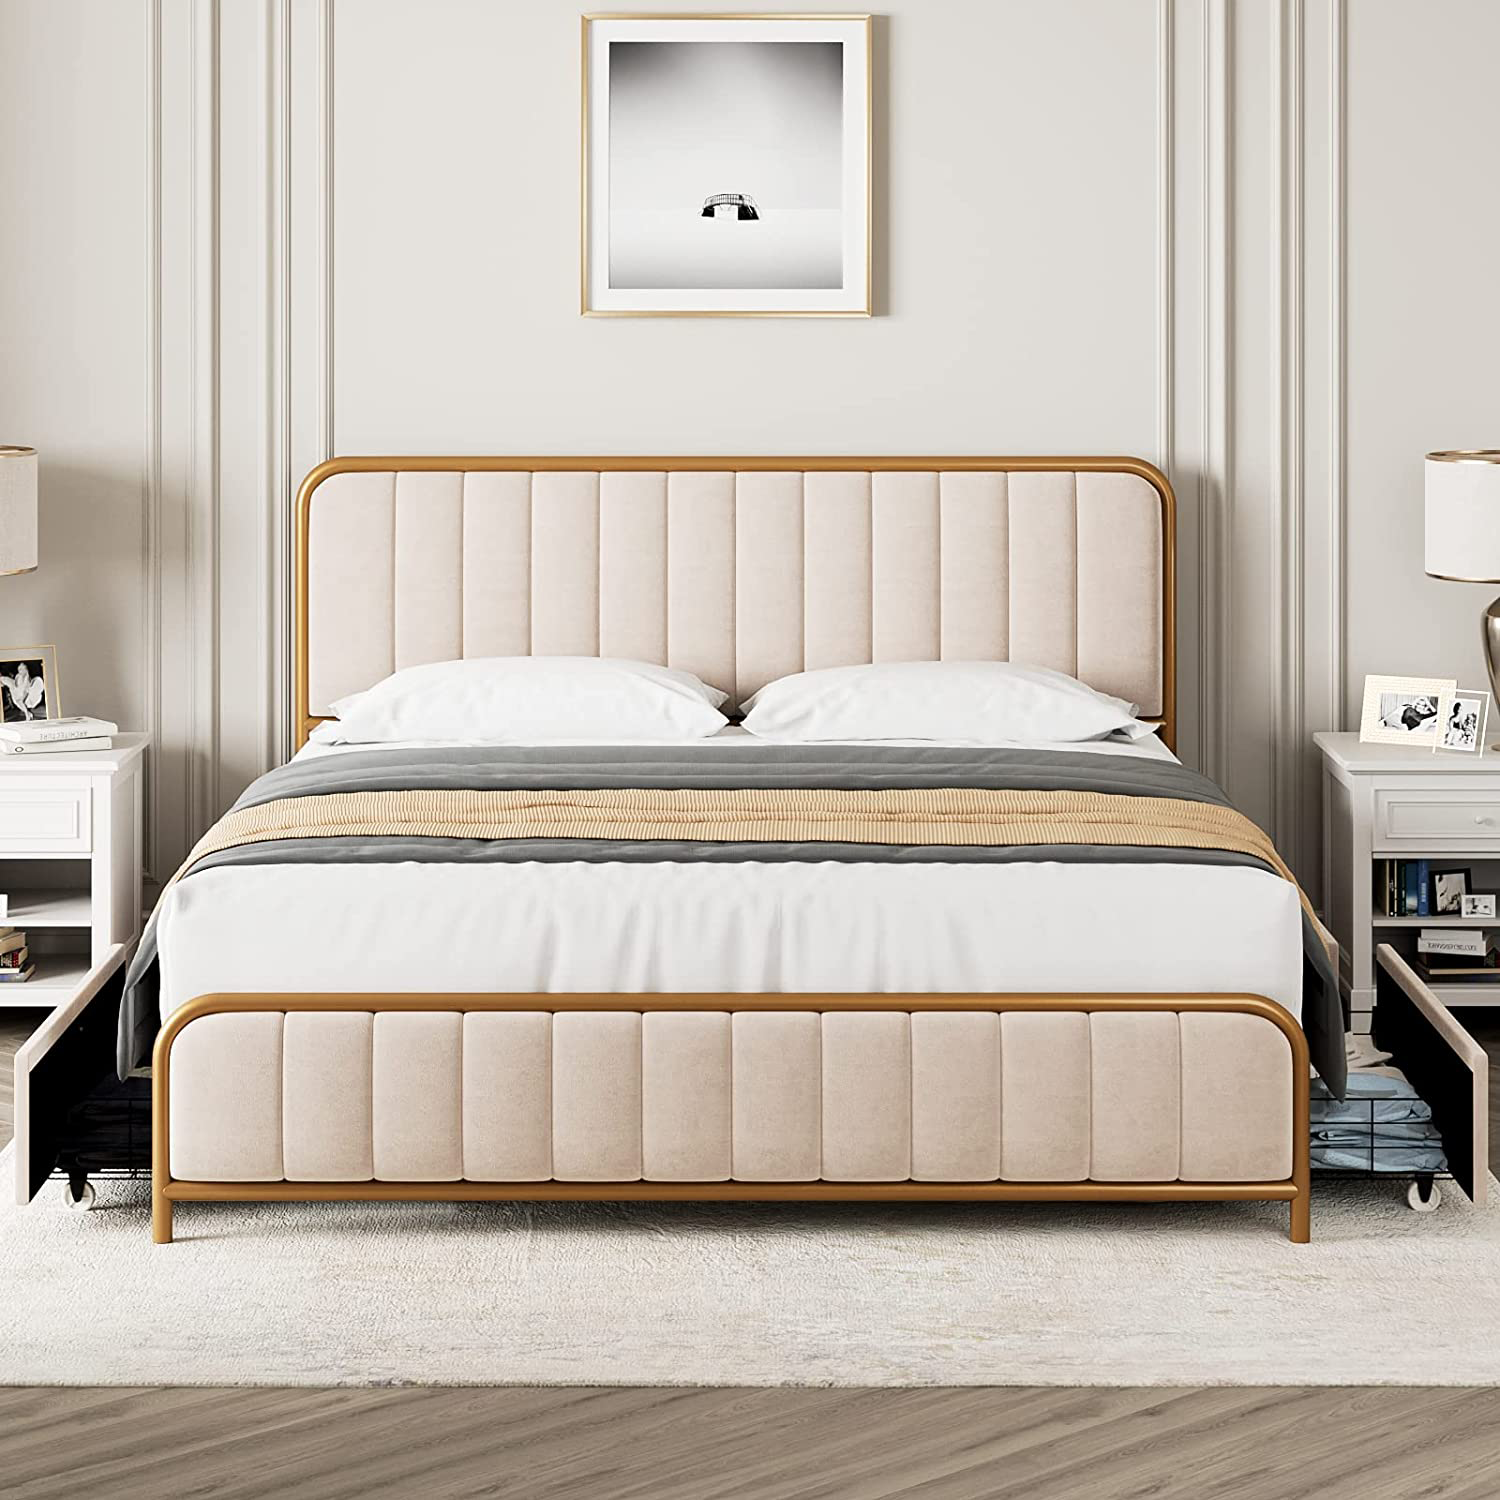 HITHOS Upholstered Queen Size Bed Frame with Storage